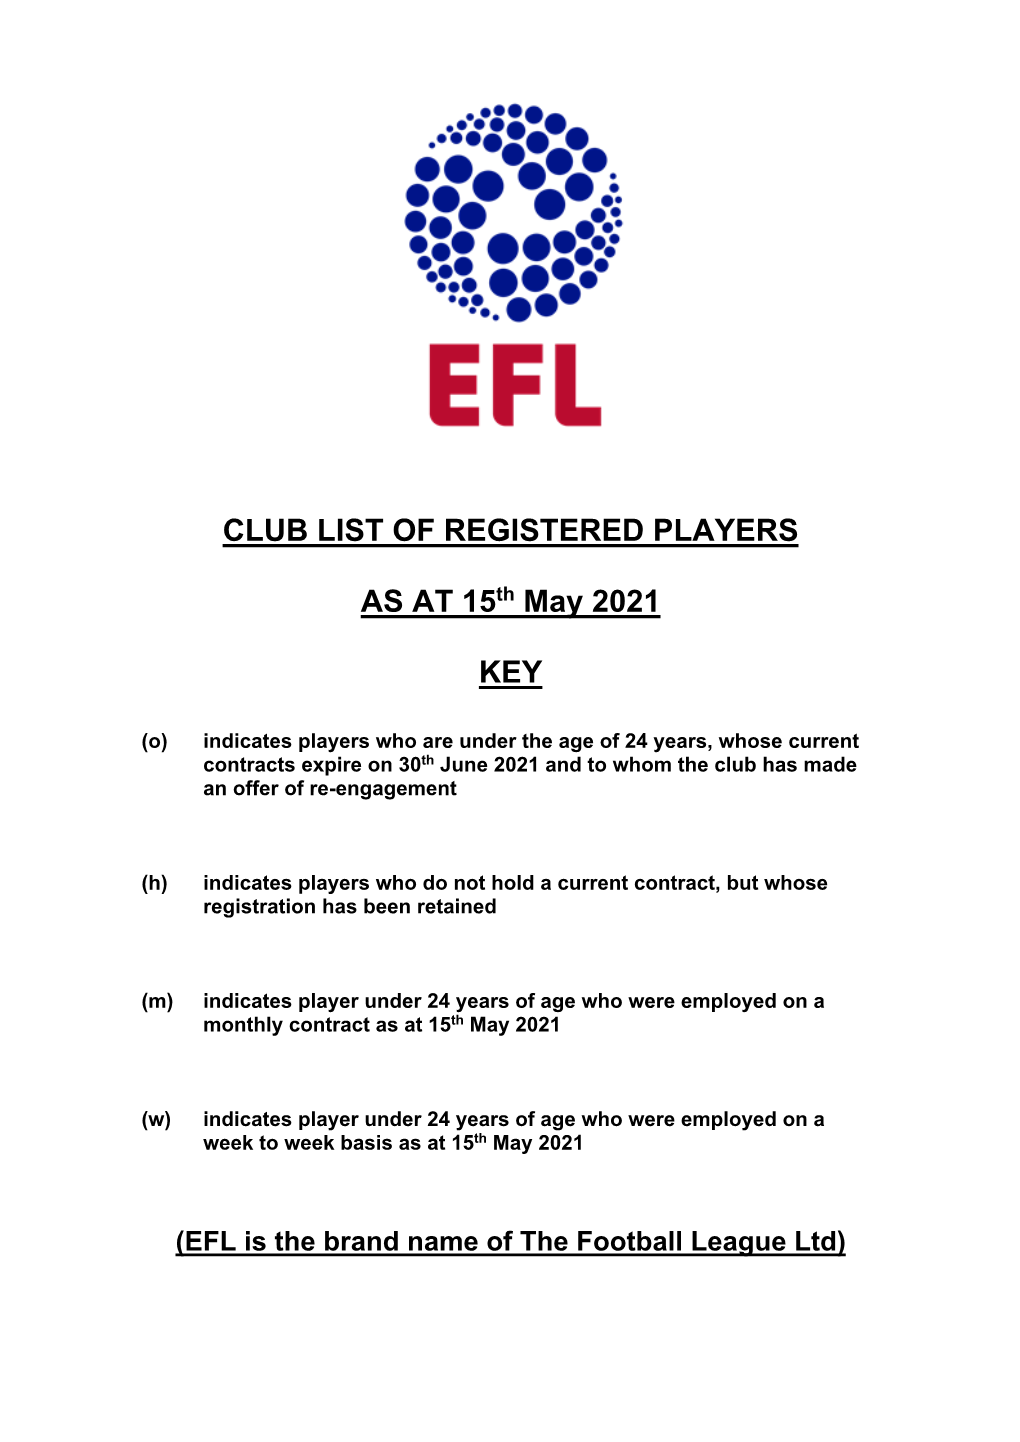 CLUB LIST of REGISTERED PLAYERS AS at 15Th May 2021